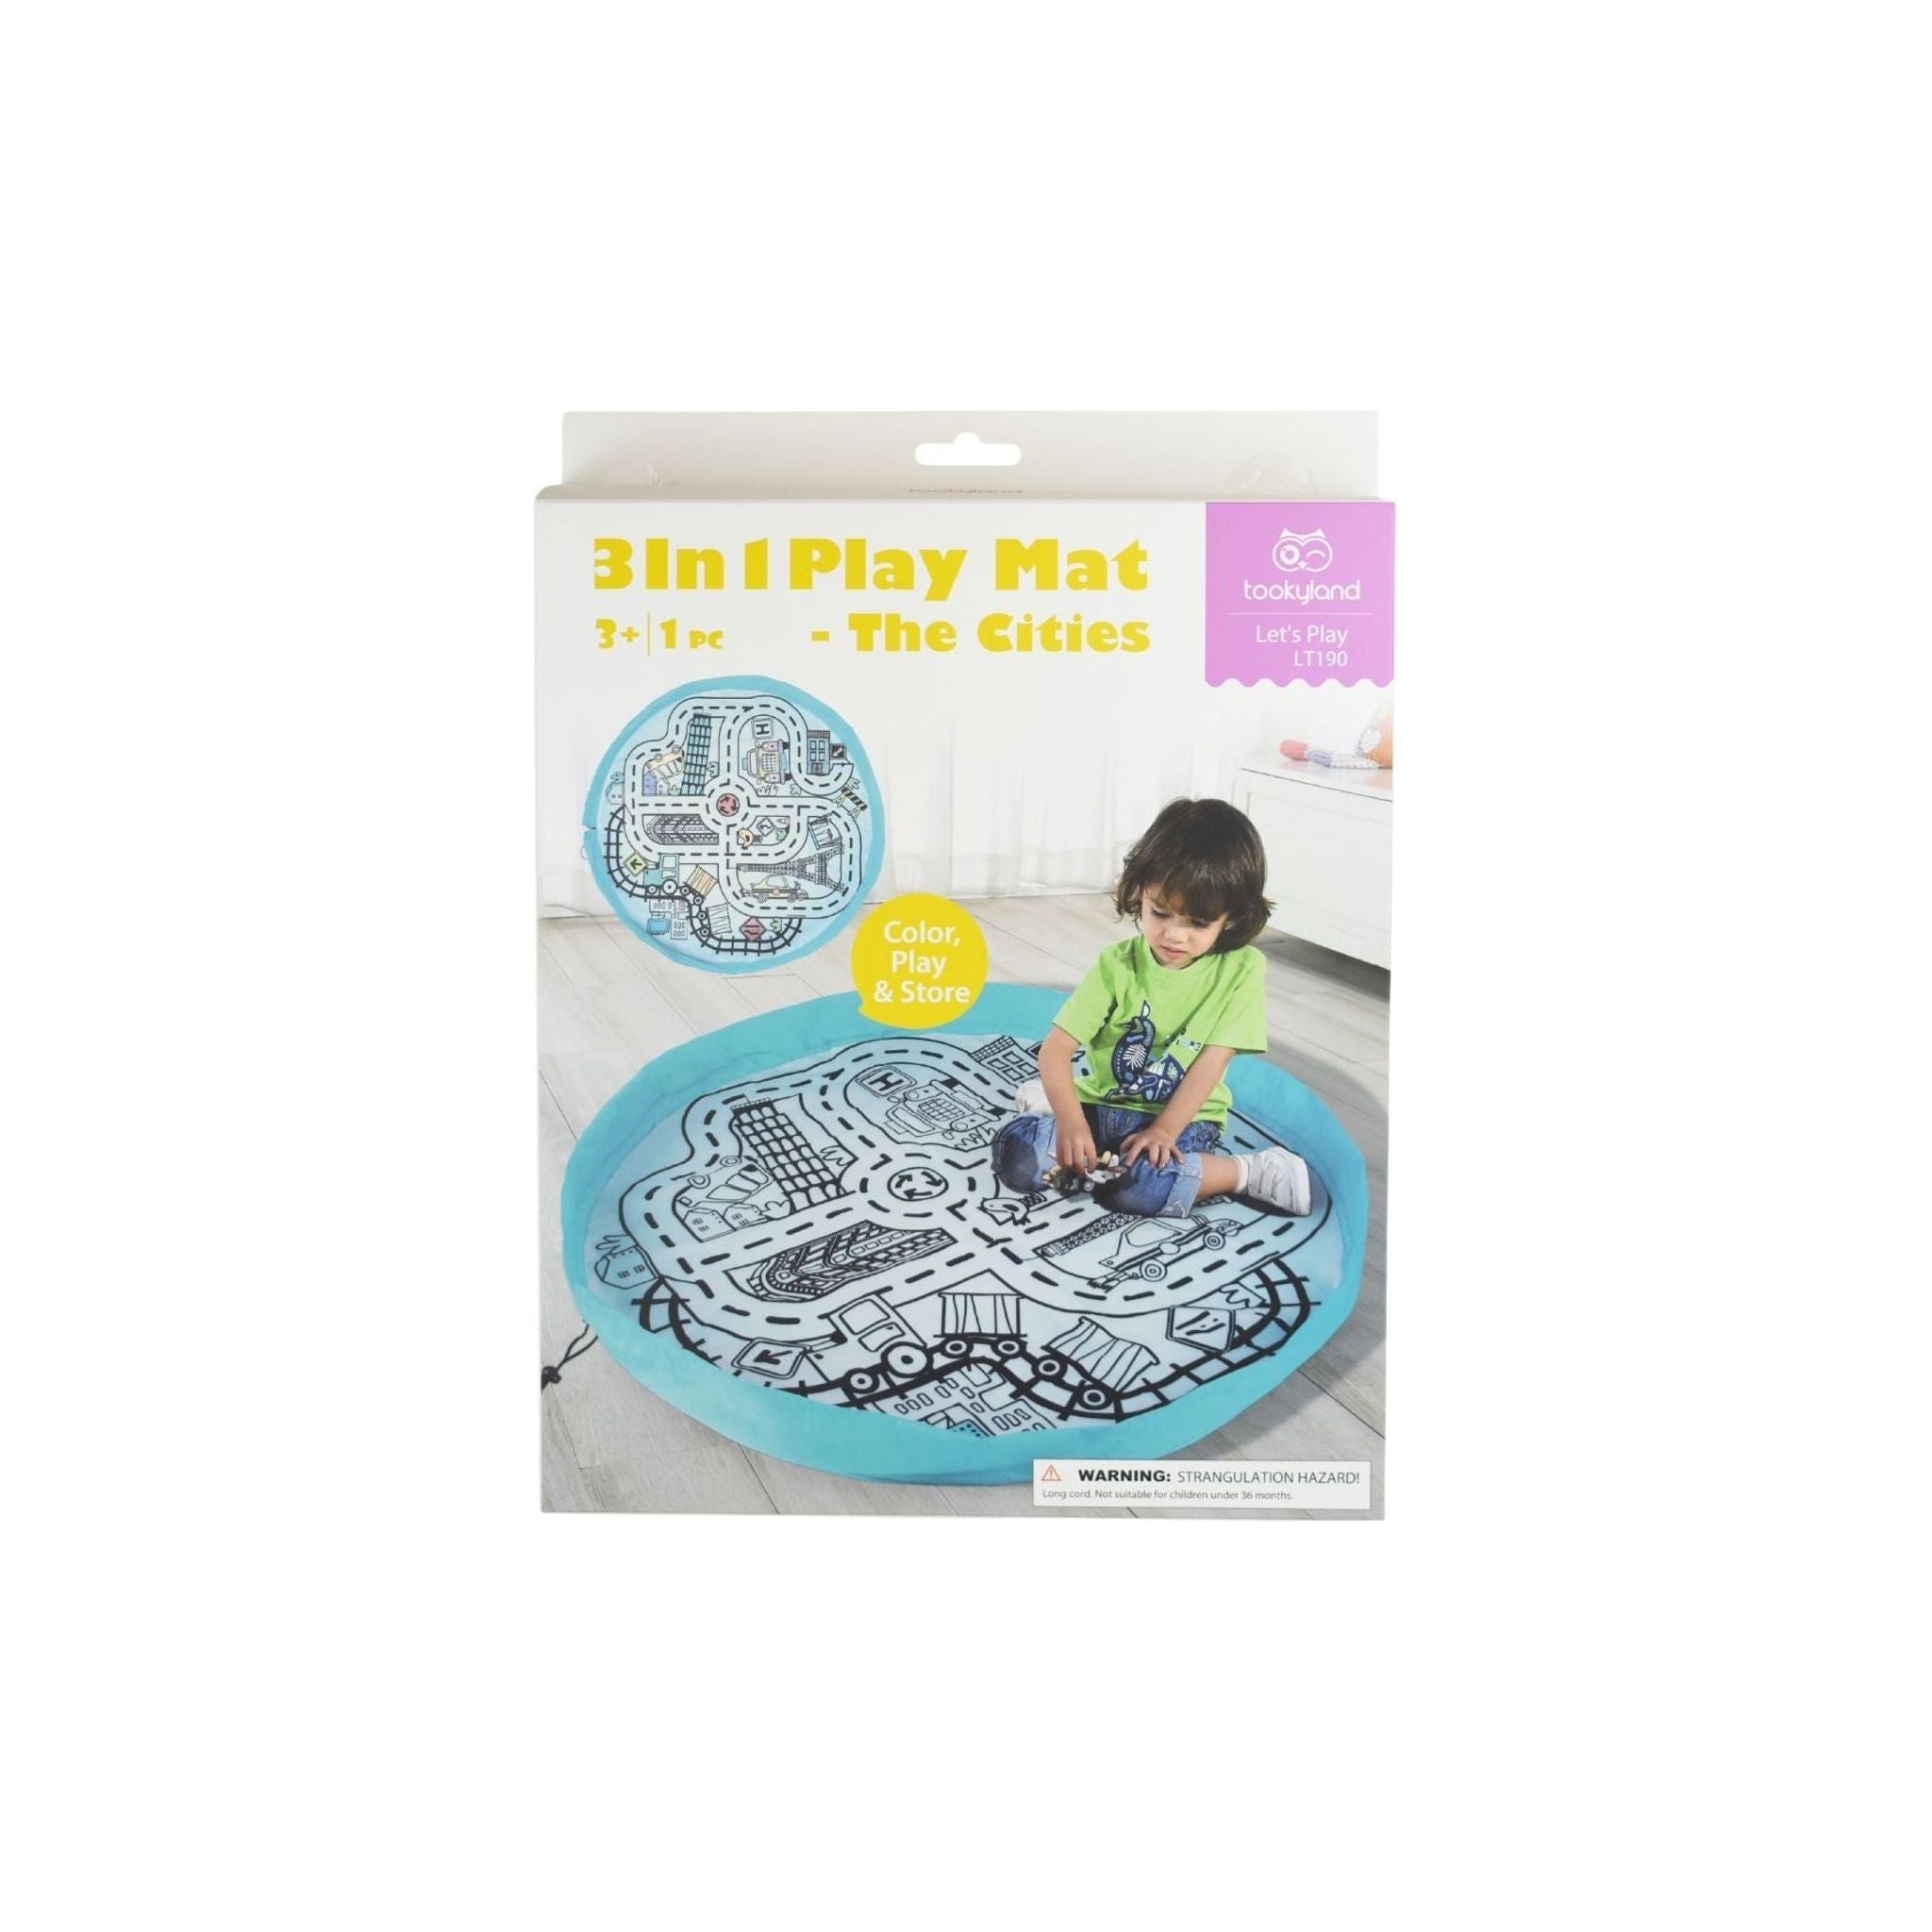 3 in 1 Play Mat - The Cities - Toybox Tales